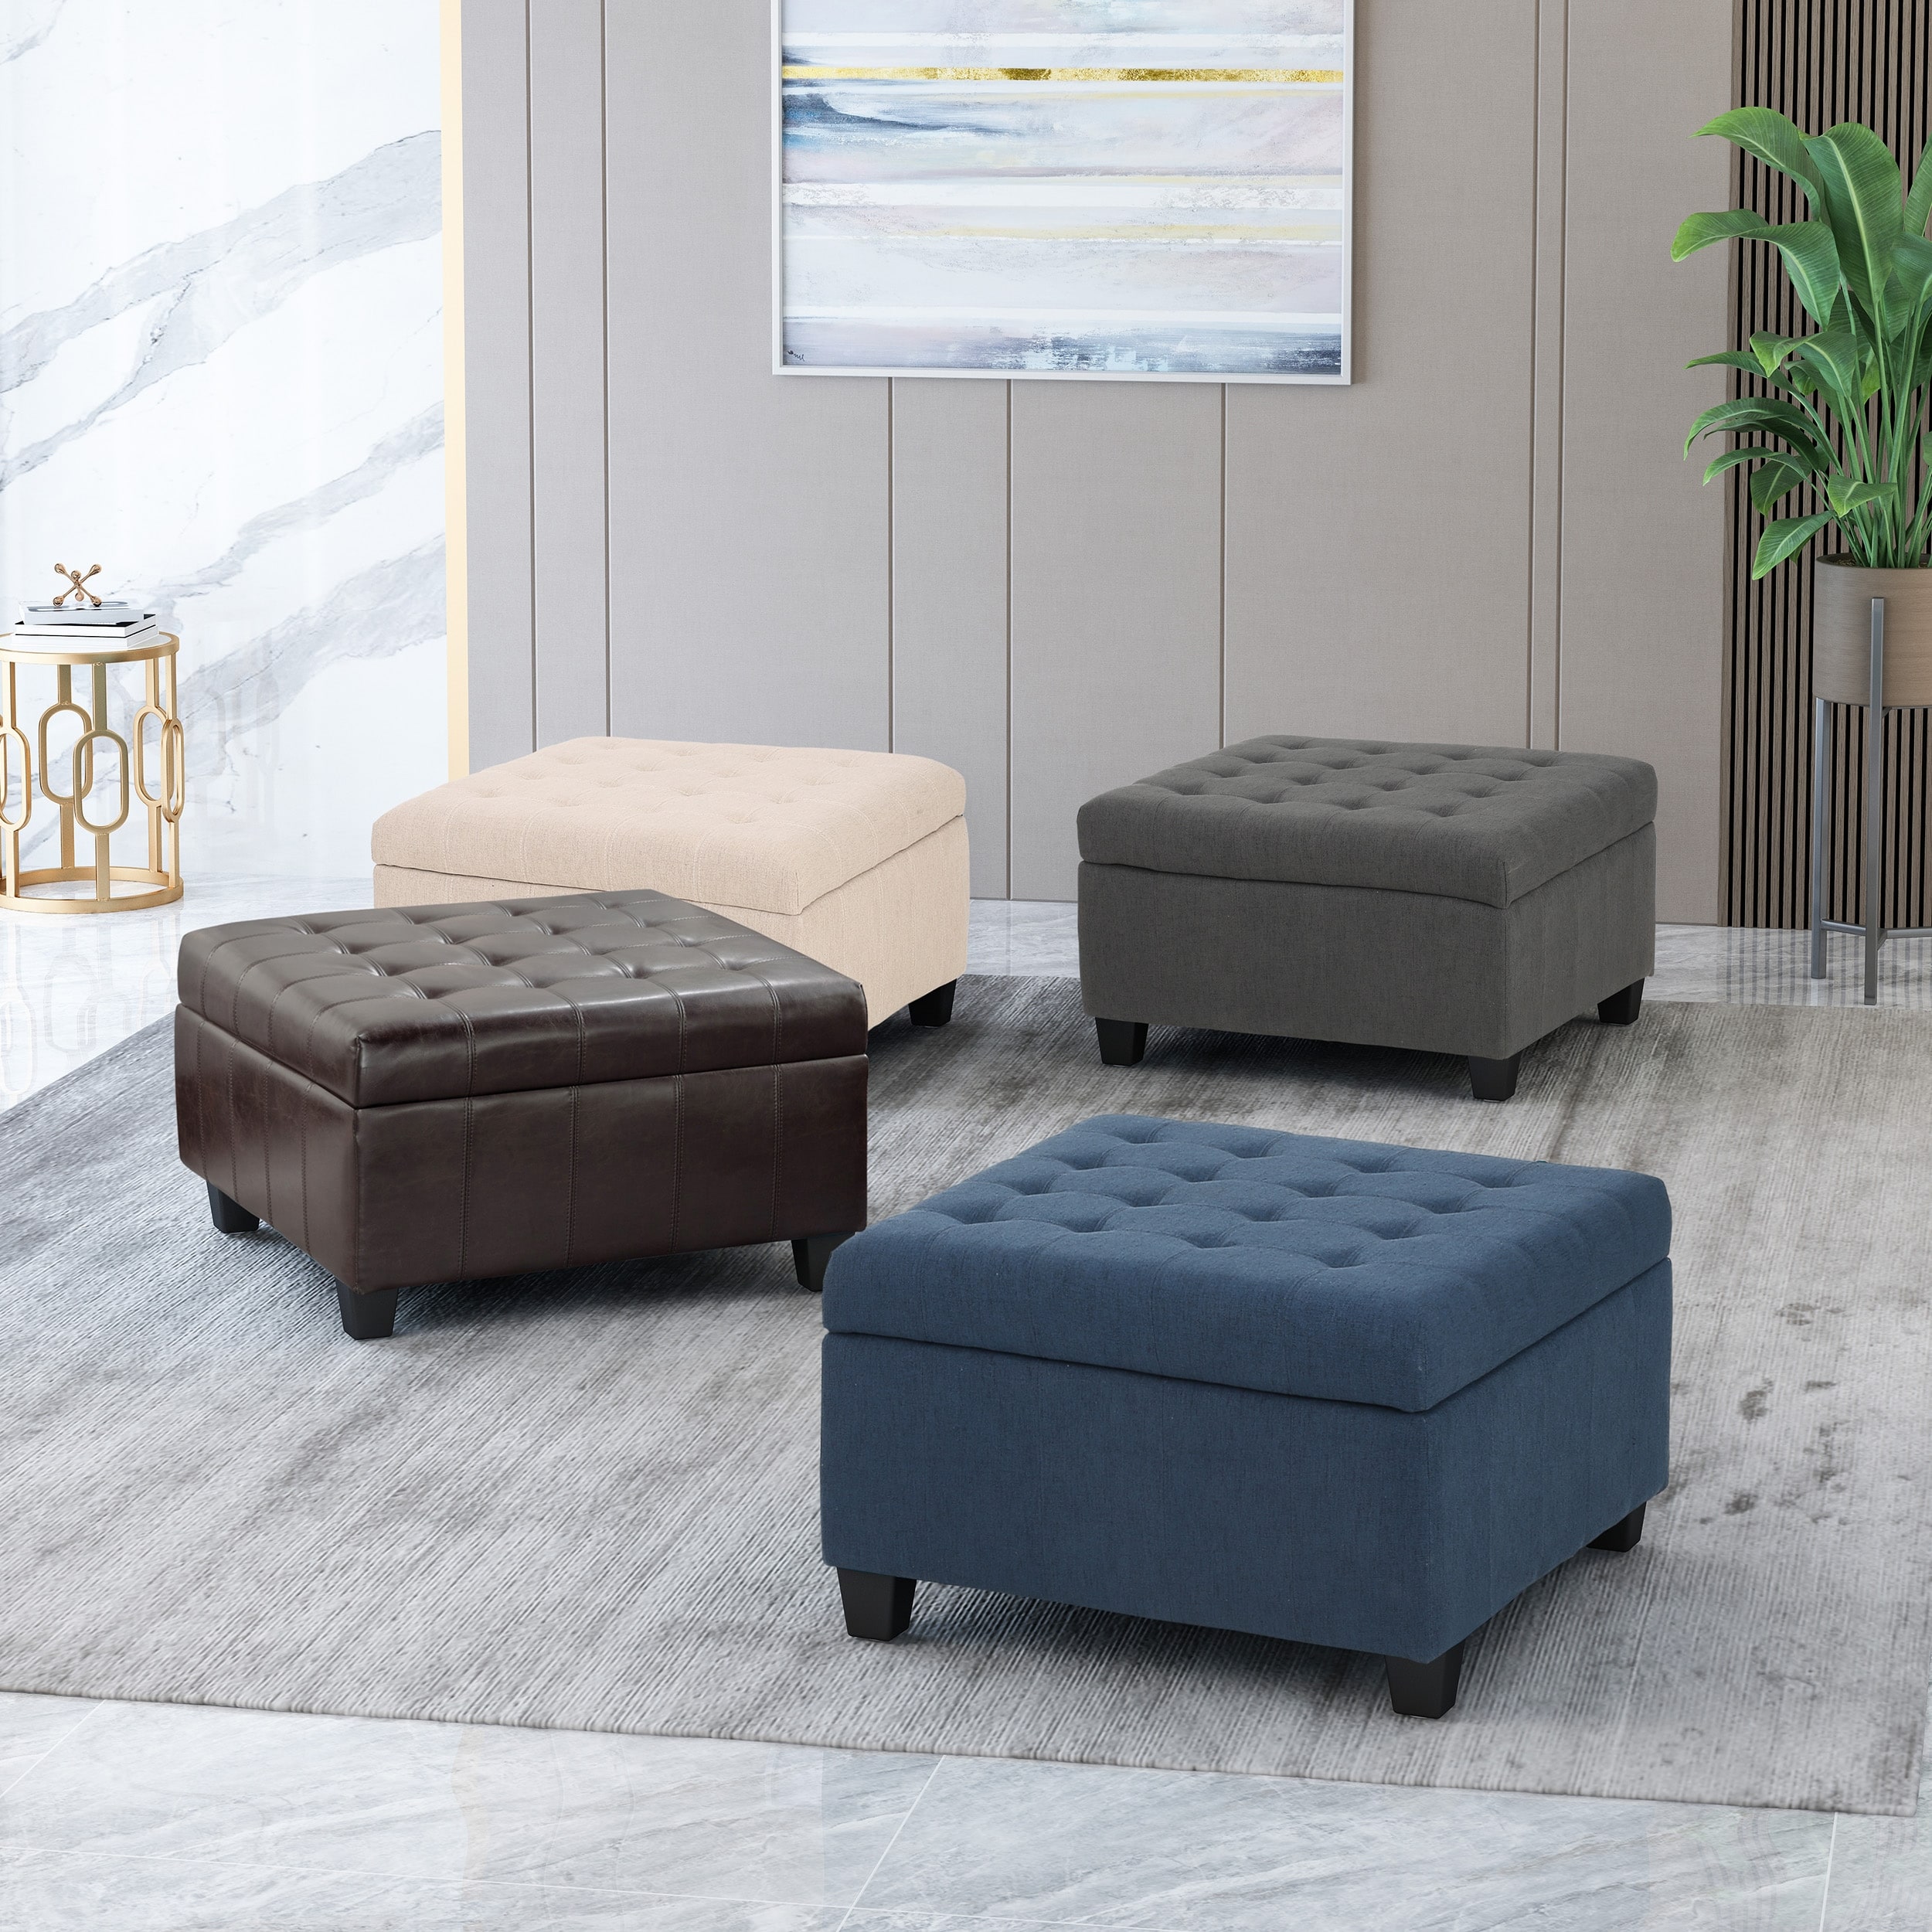 https://ak1.ostkcdn.com/images/products/is/images/direct/2b886c8f7f0cf56543c25fcaa8f3a7c132f1f461/Isabella-Tufted-Storage-Ottoman-by-Christopher-Knight-Home.jpg